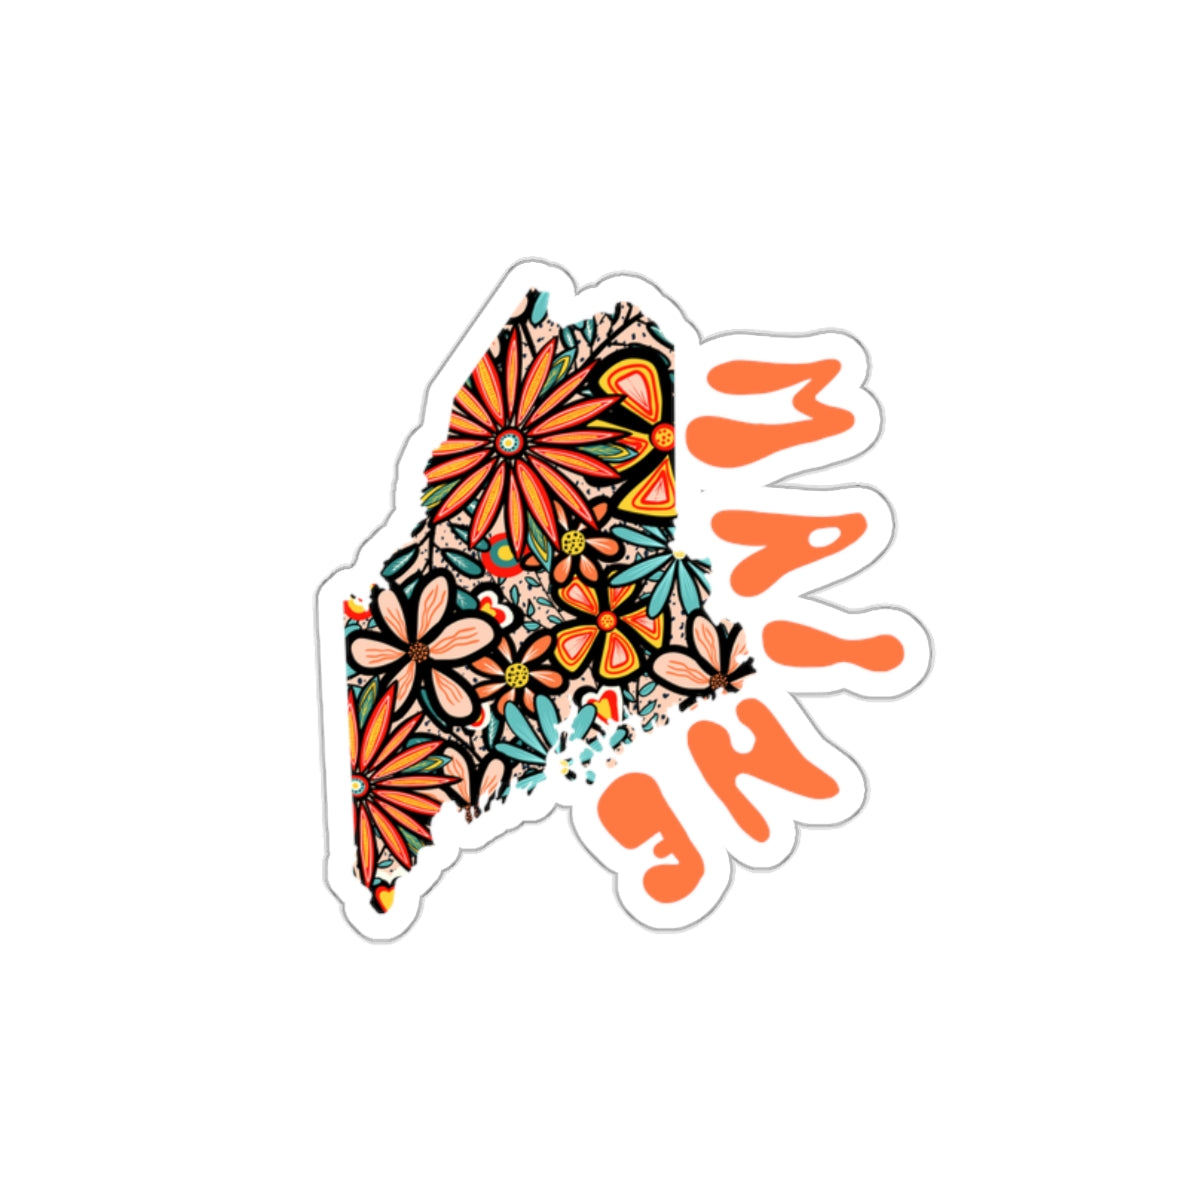 Maine State Sticker | Vinyl Artist Designed Illustration Featuring Maine State Outline Filled With Retro Flowers with Retro Hand-Lettering Die-Cut Stickers